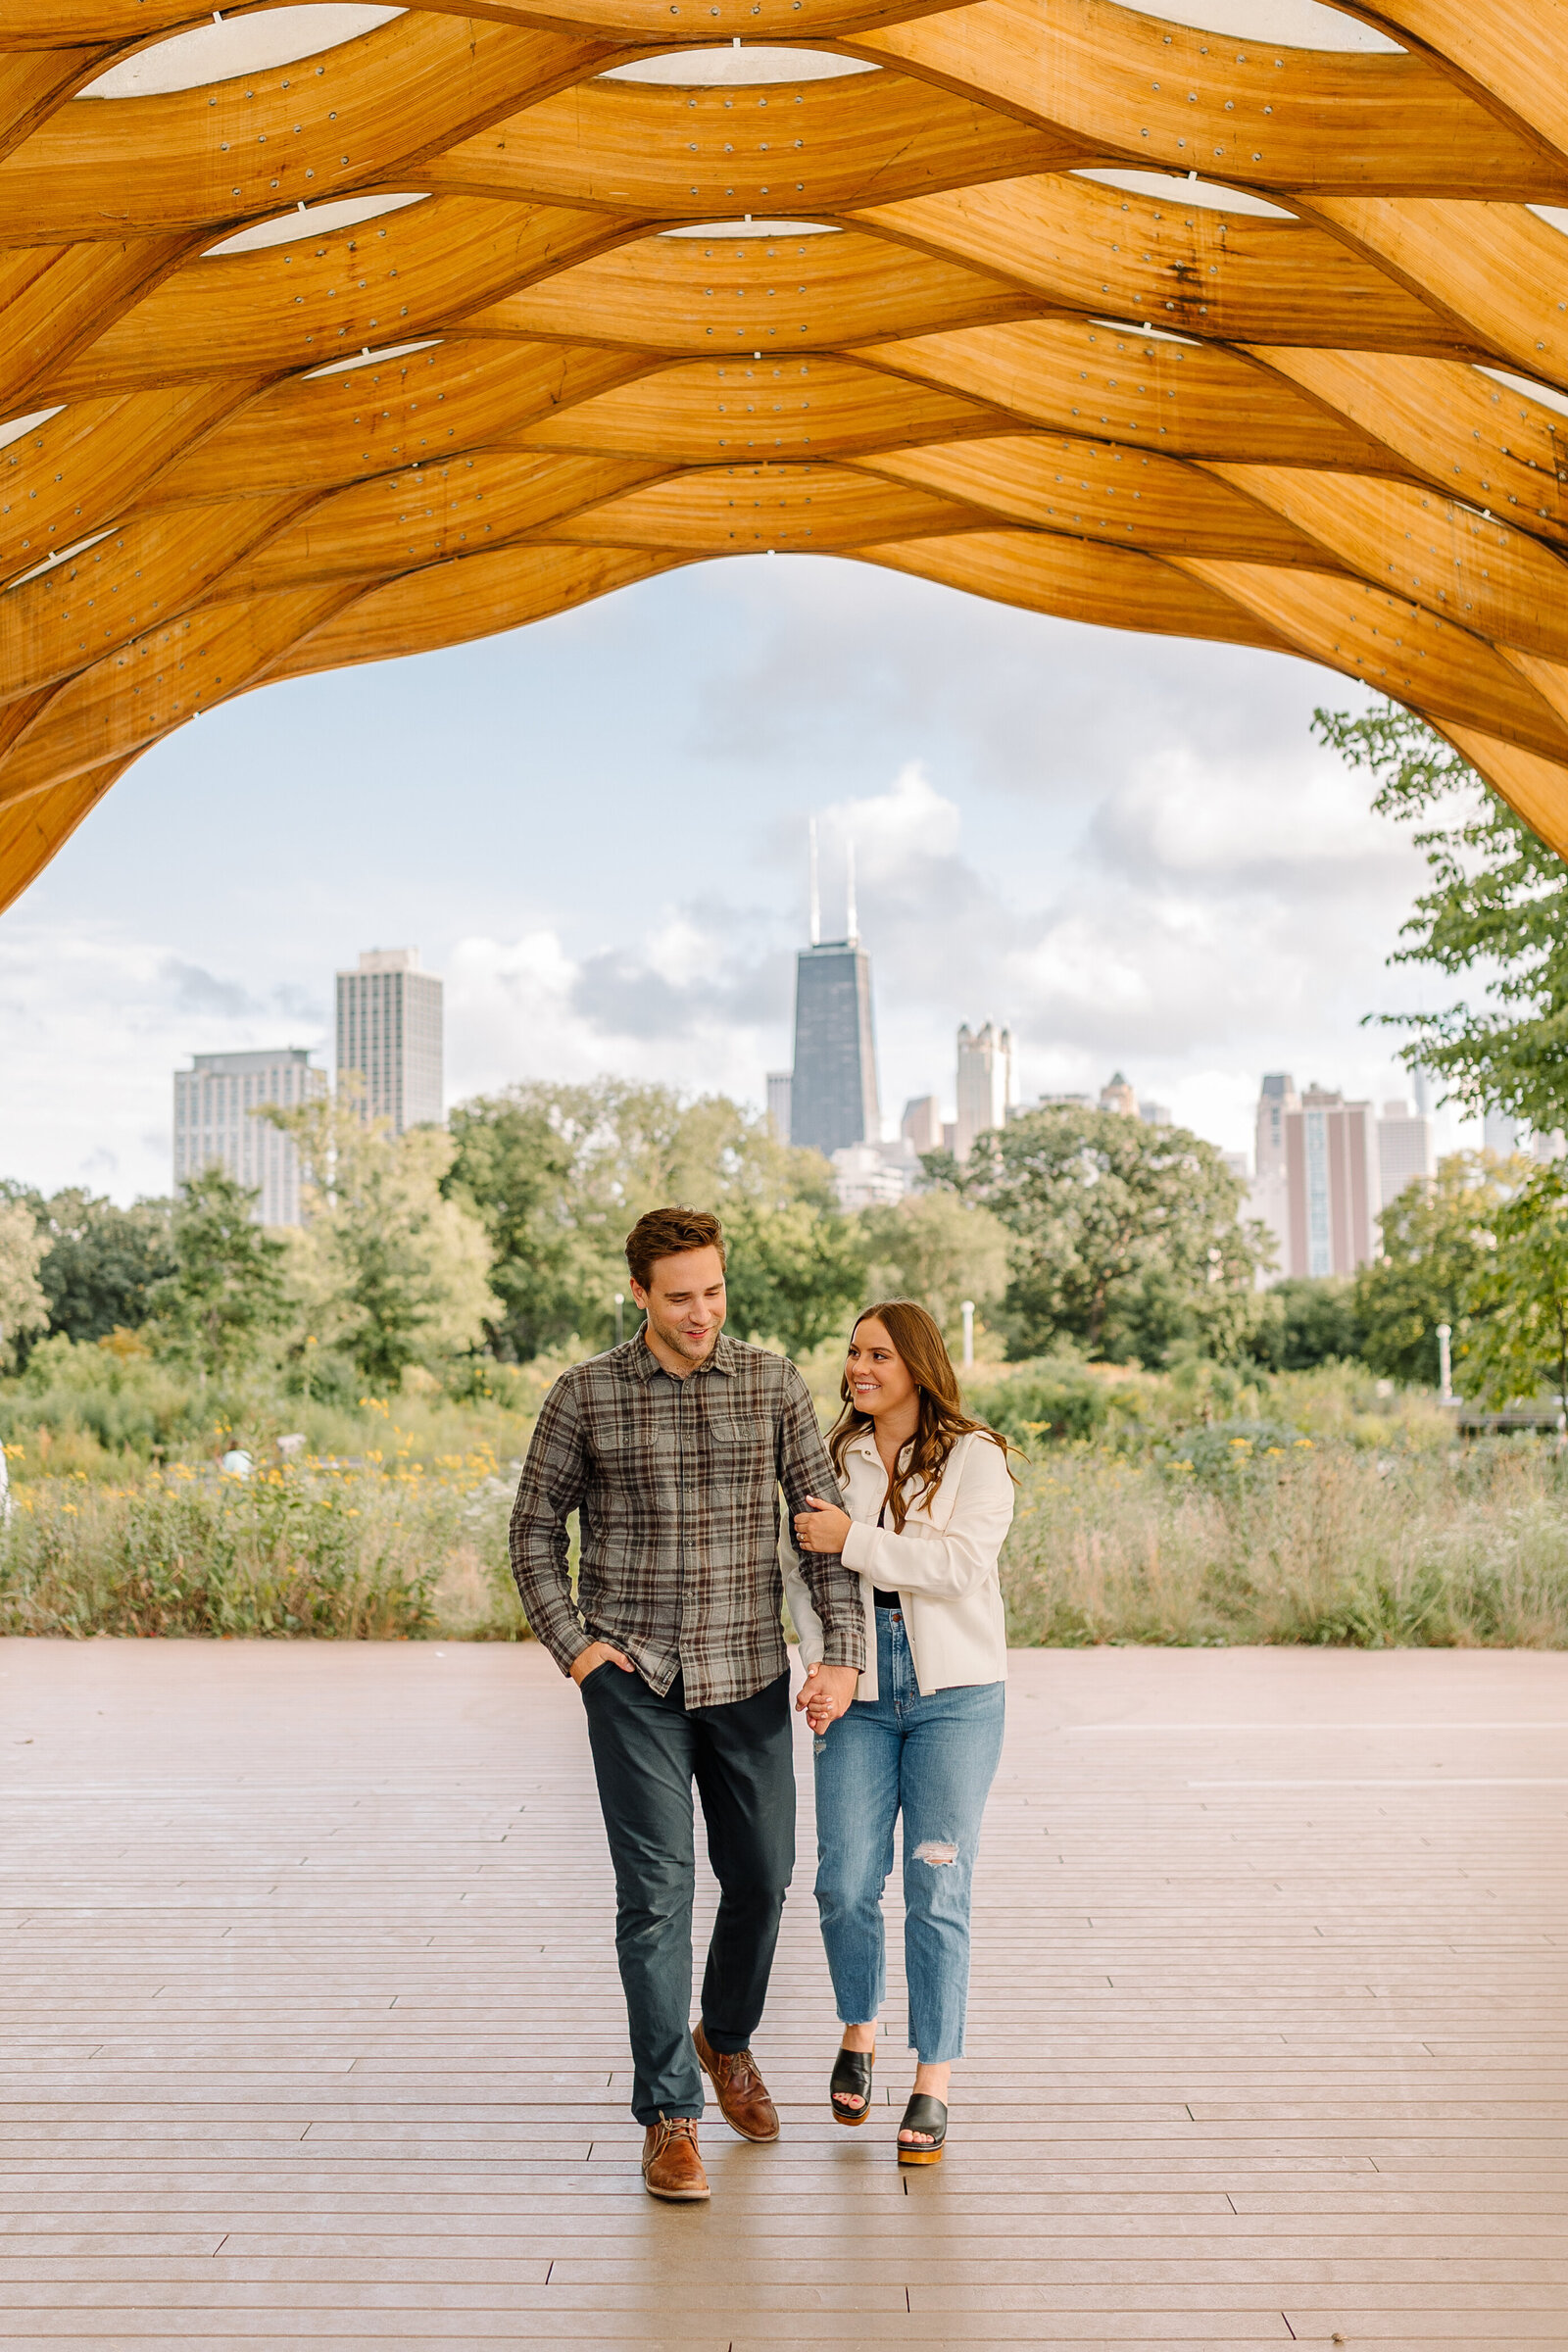 Young couple walking together while hugging each other under the honeycomb sculpture in Chicago